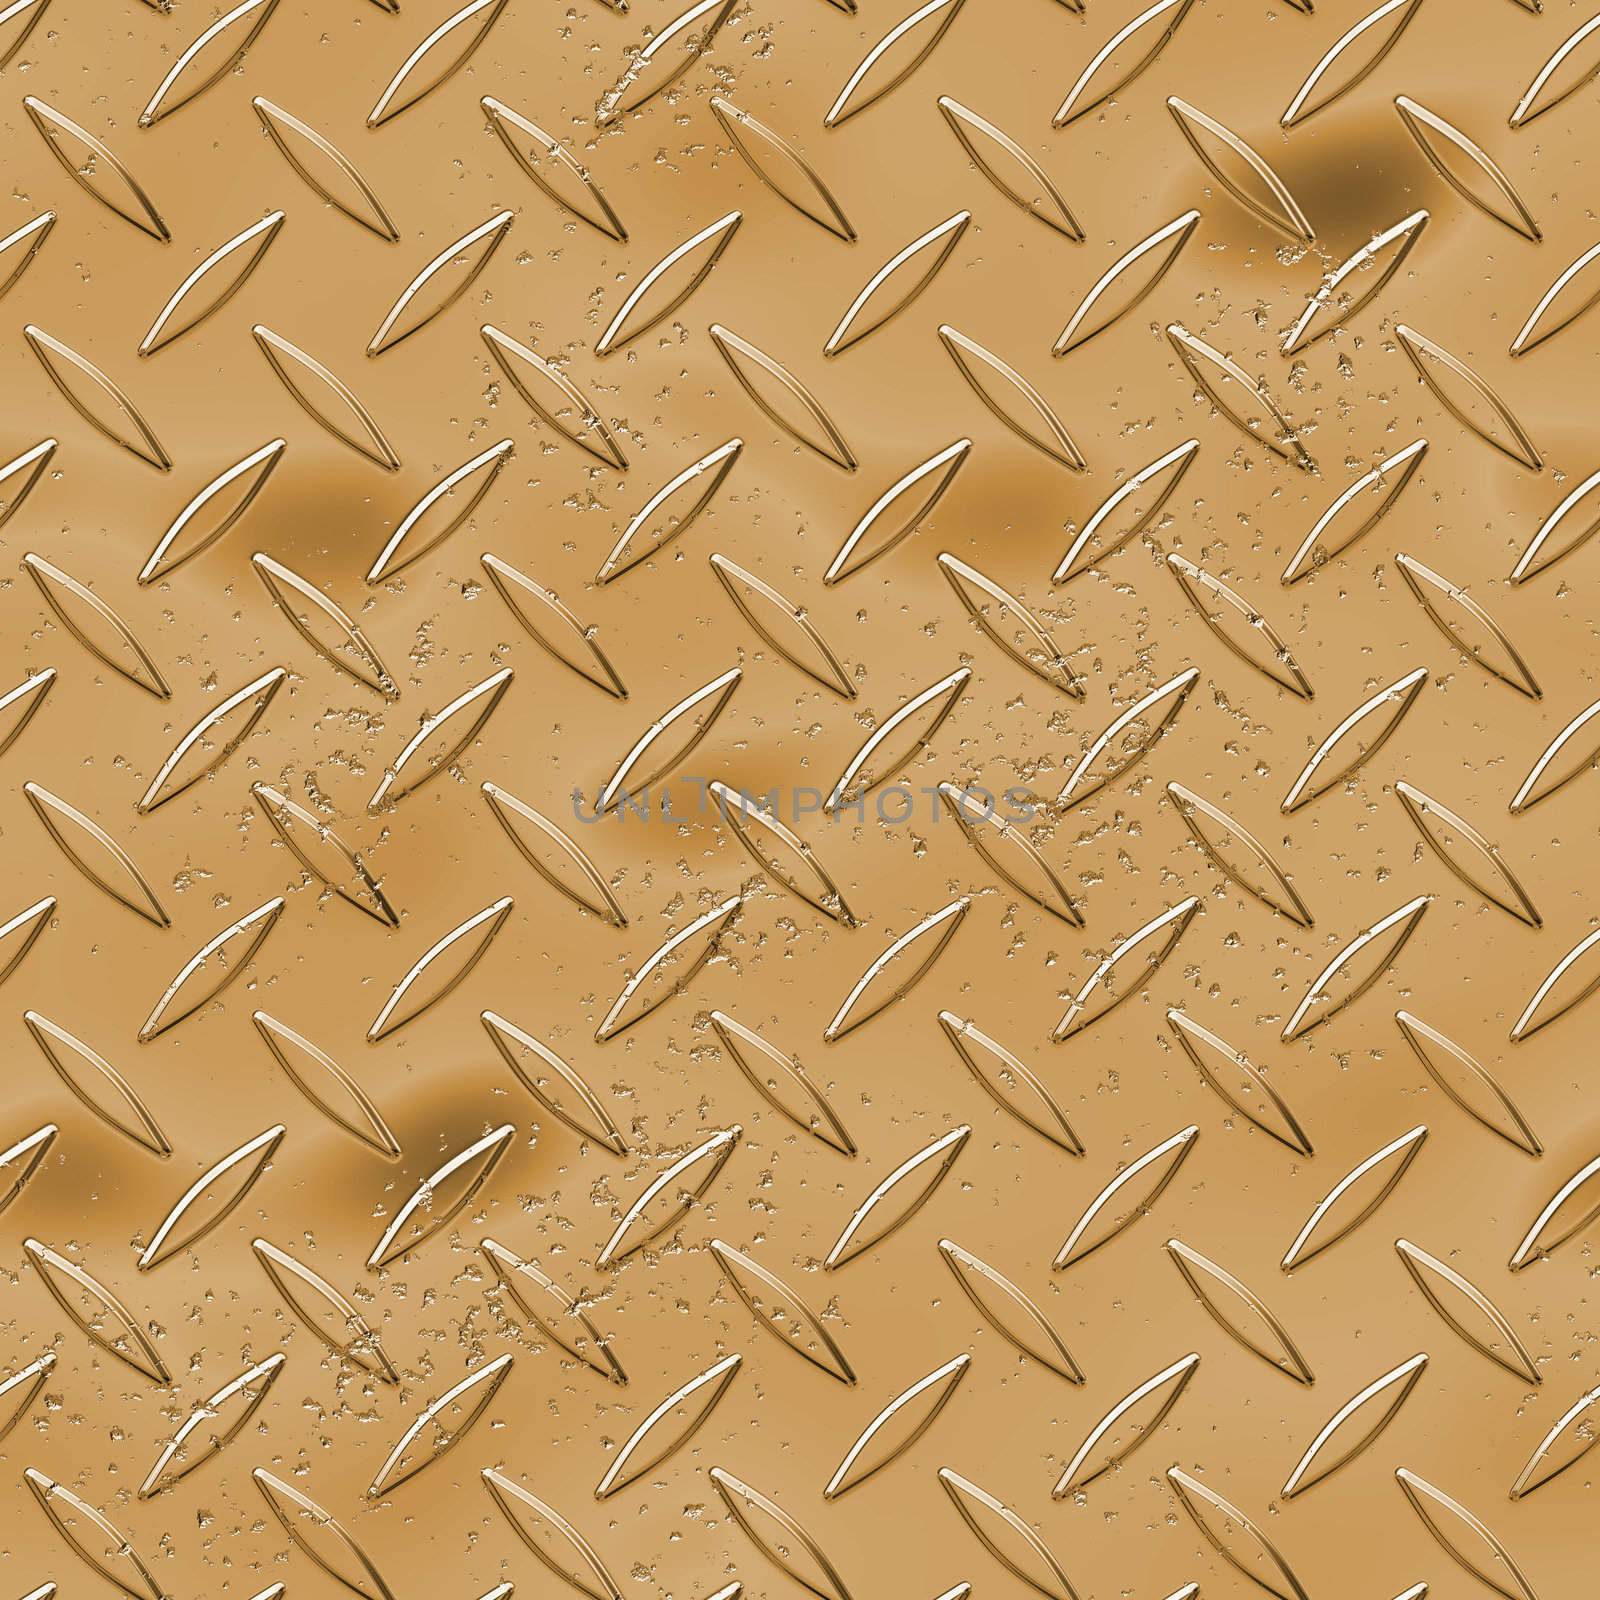 A gold/bronze/copper toned diamond plate texture - a great metal background for an industrial or contruction type look.  Fully tileable - this tiles seamlessly as a pattern.